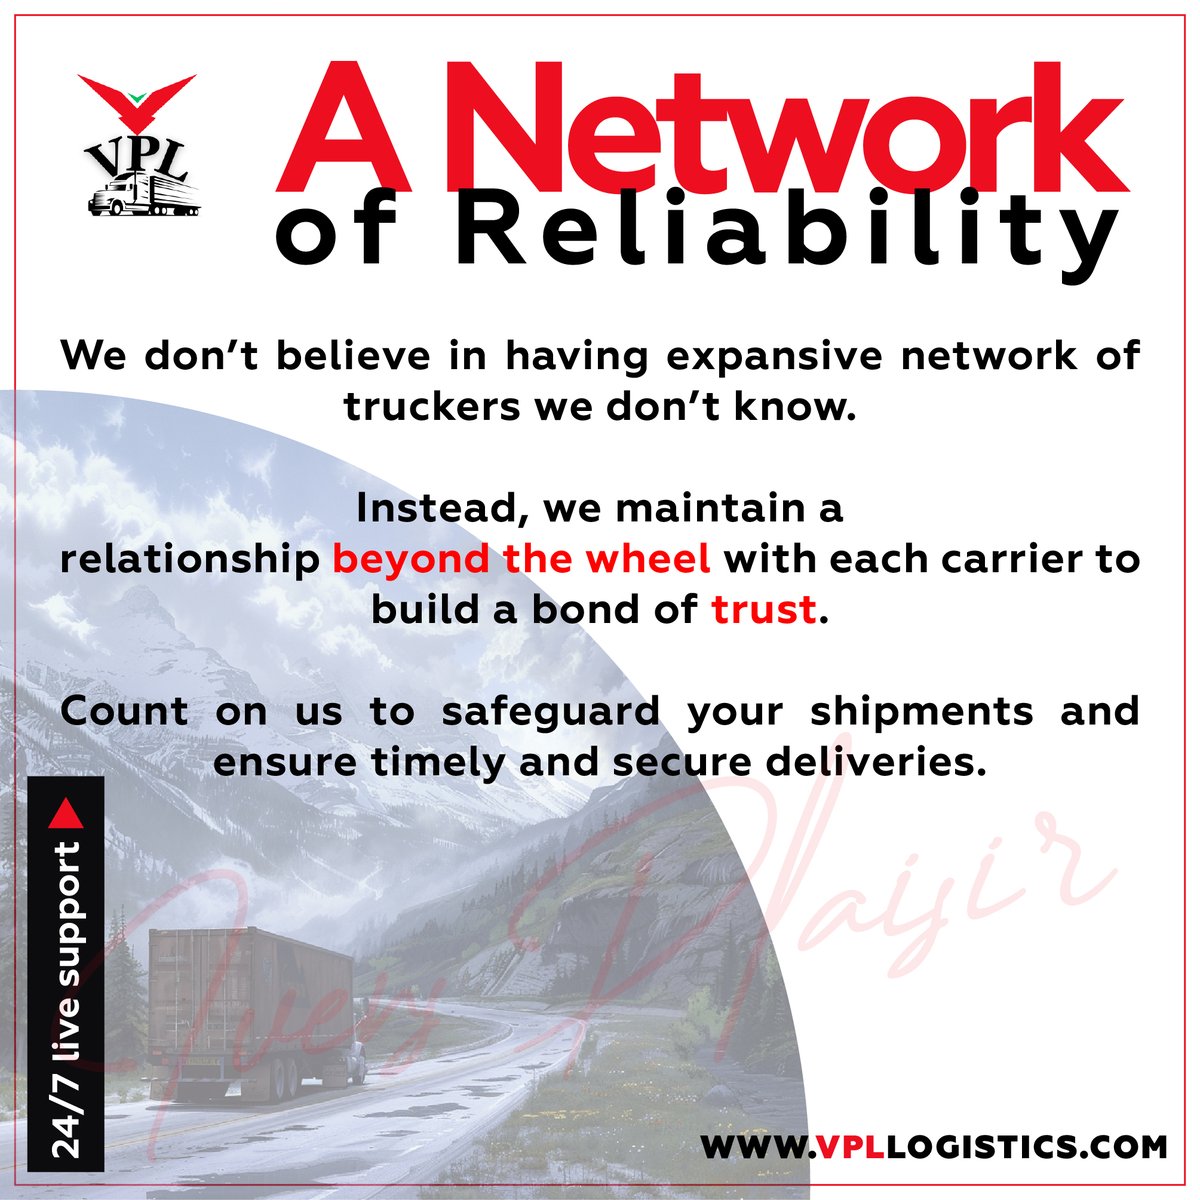 A Network of Reliability

We don’t believe in having expansive network of truckers we don’t know. Instead, we maintain a relationship beyond the wheel with each carrier to build a bond of trust.

#vensplailogistics #VPL #TransportationServices